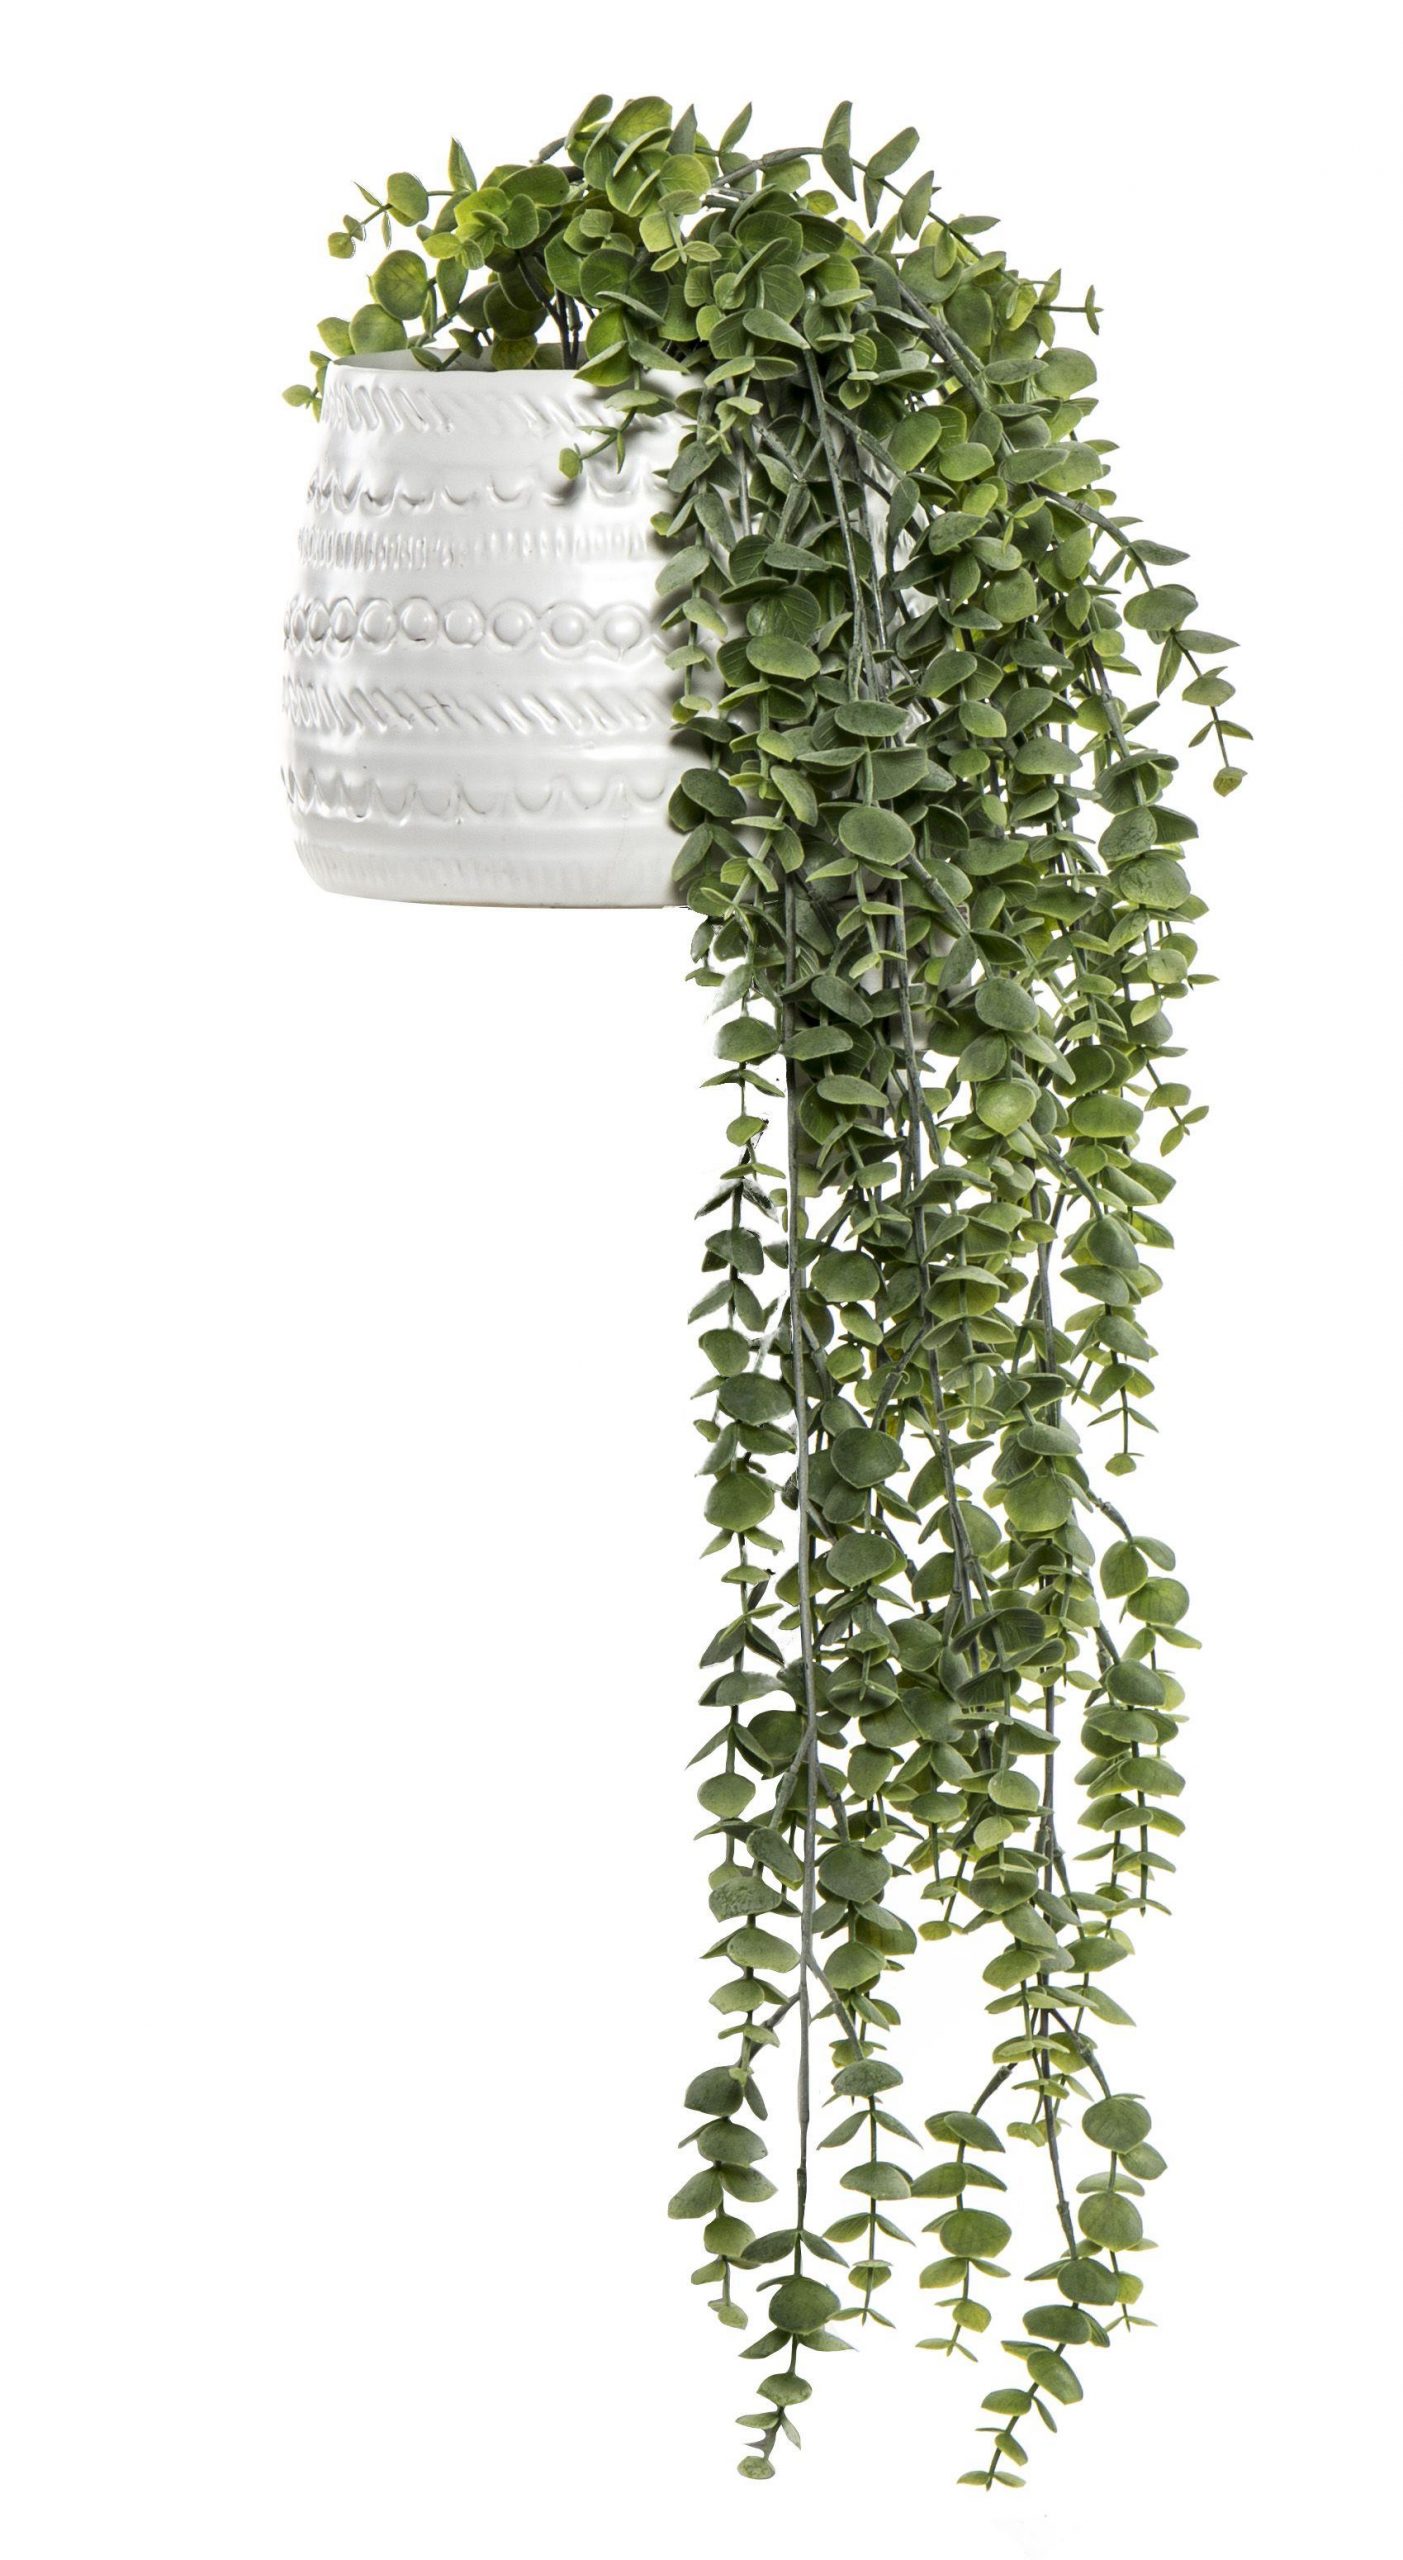 Hanging Silverleaf in Tully Pot White